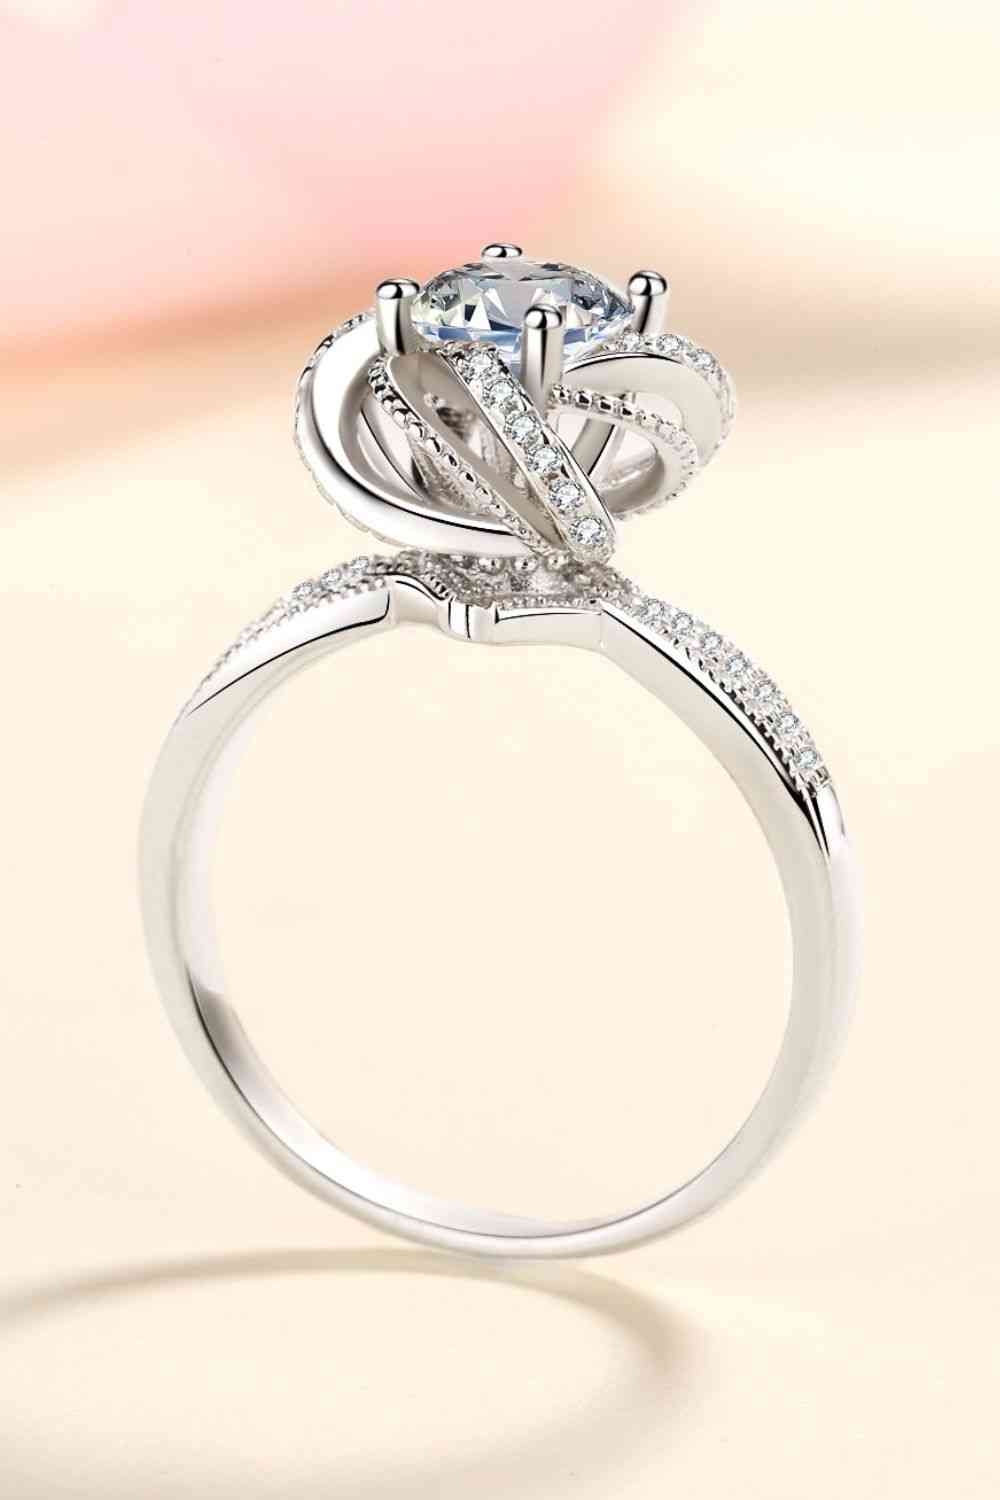 Ethereal Sparkle: 1 Carat Moissanite Ring